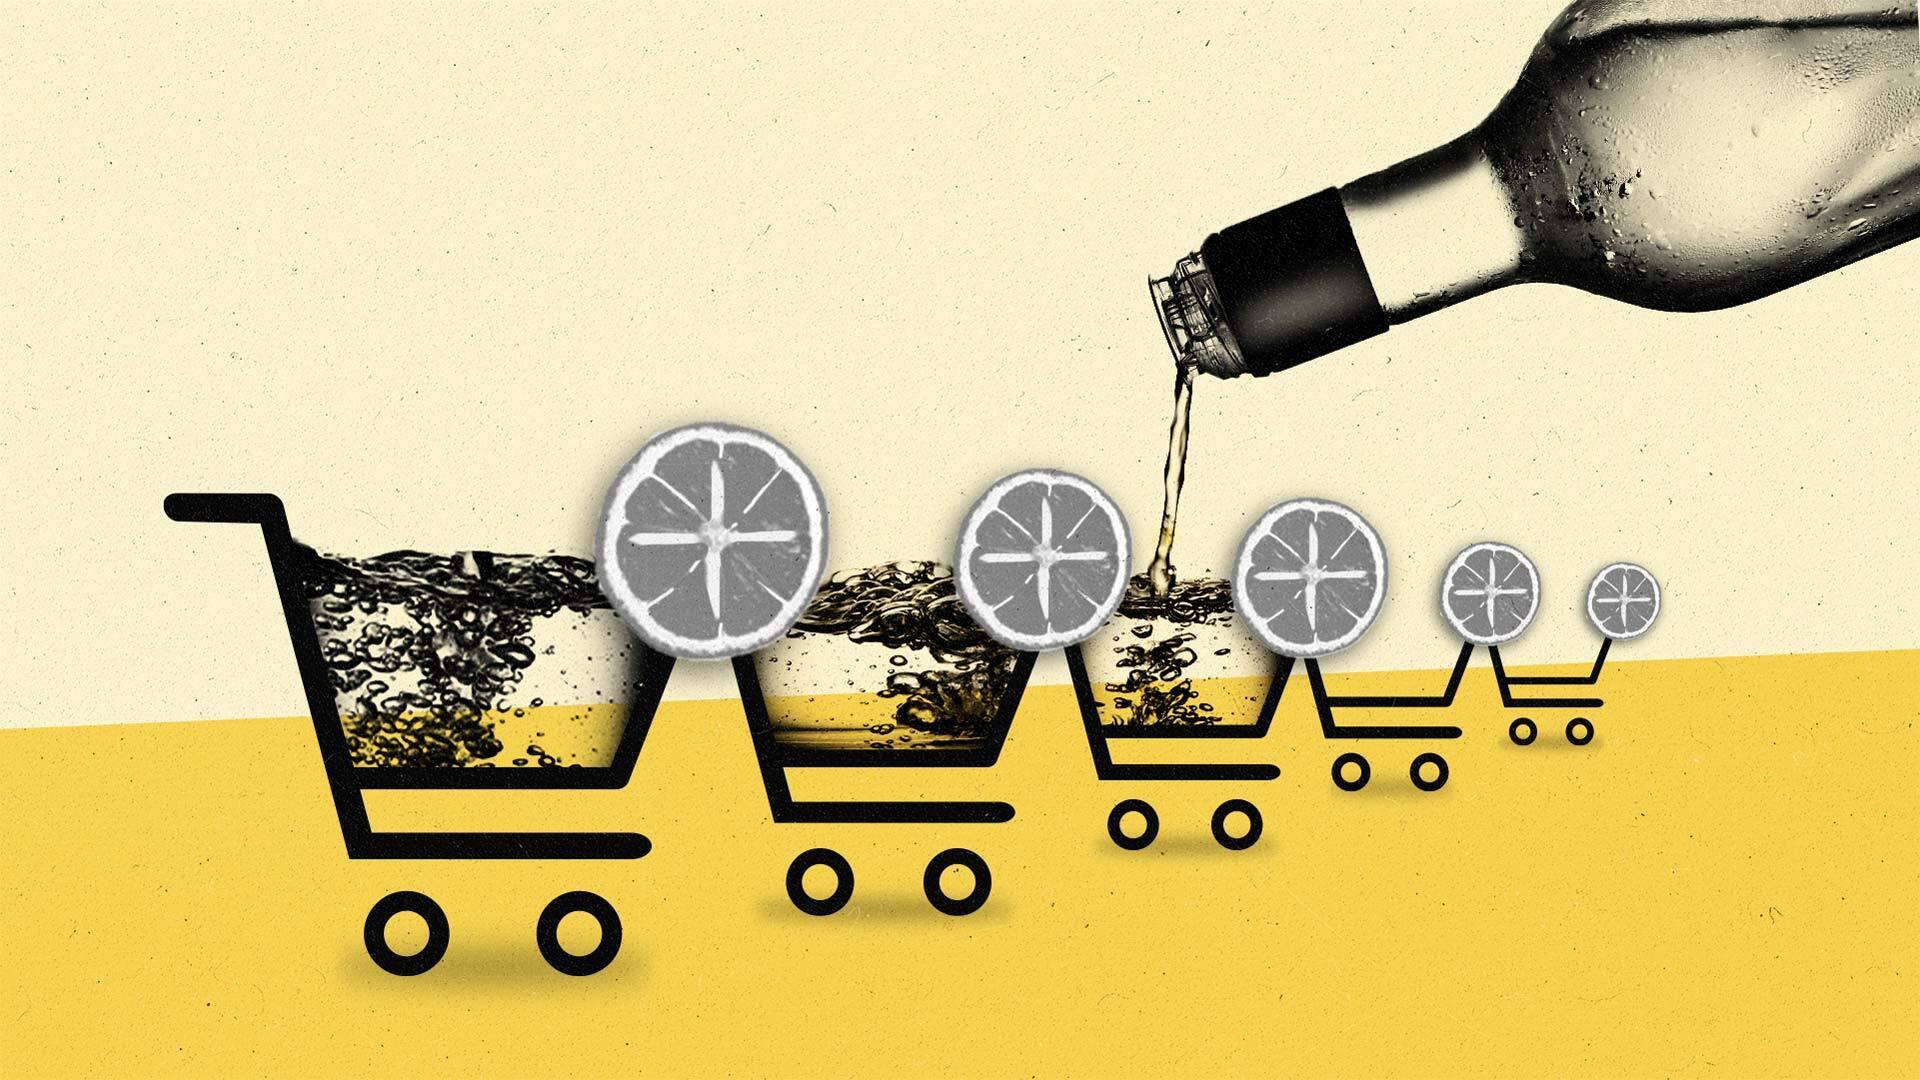 Illustration of bottle pouring into shopping cart shot glasses, each adorned with lemon wedges showing a plus icon.